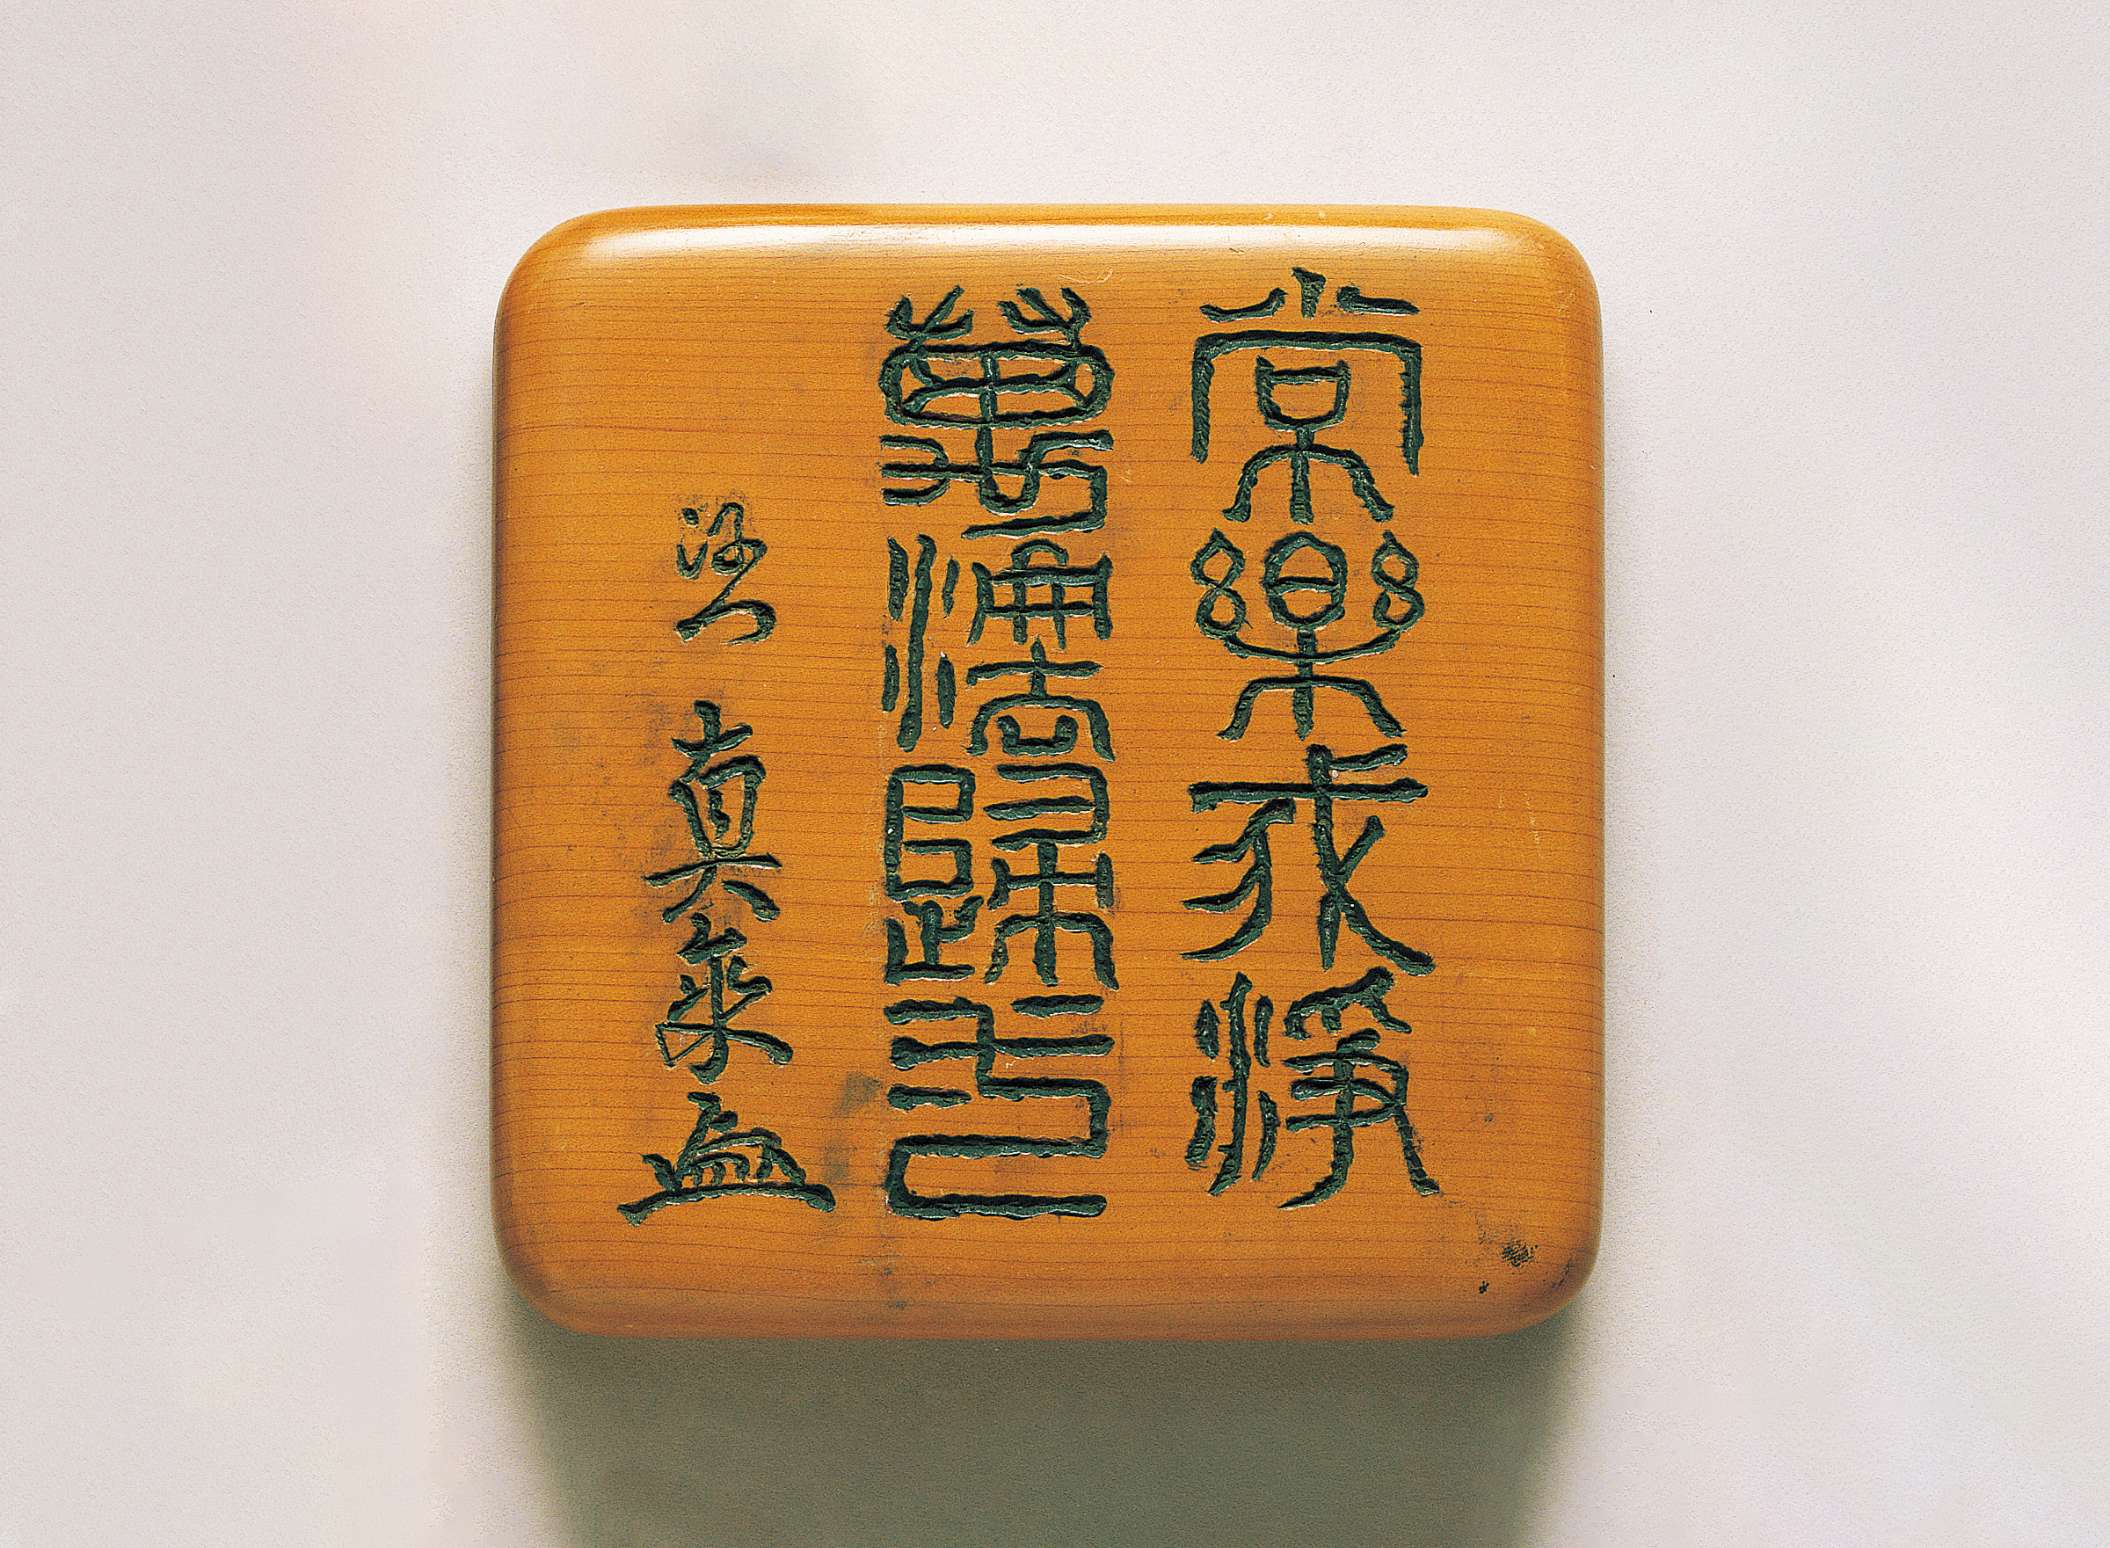 A square slab of smooth, polished sienna colored wood is engraved with vertically oriented, stylized Japanese characters, to the left of which is engraved a line of flowing Japanese calligraphy.